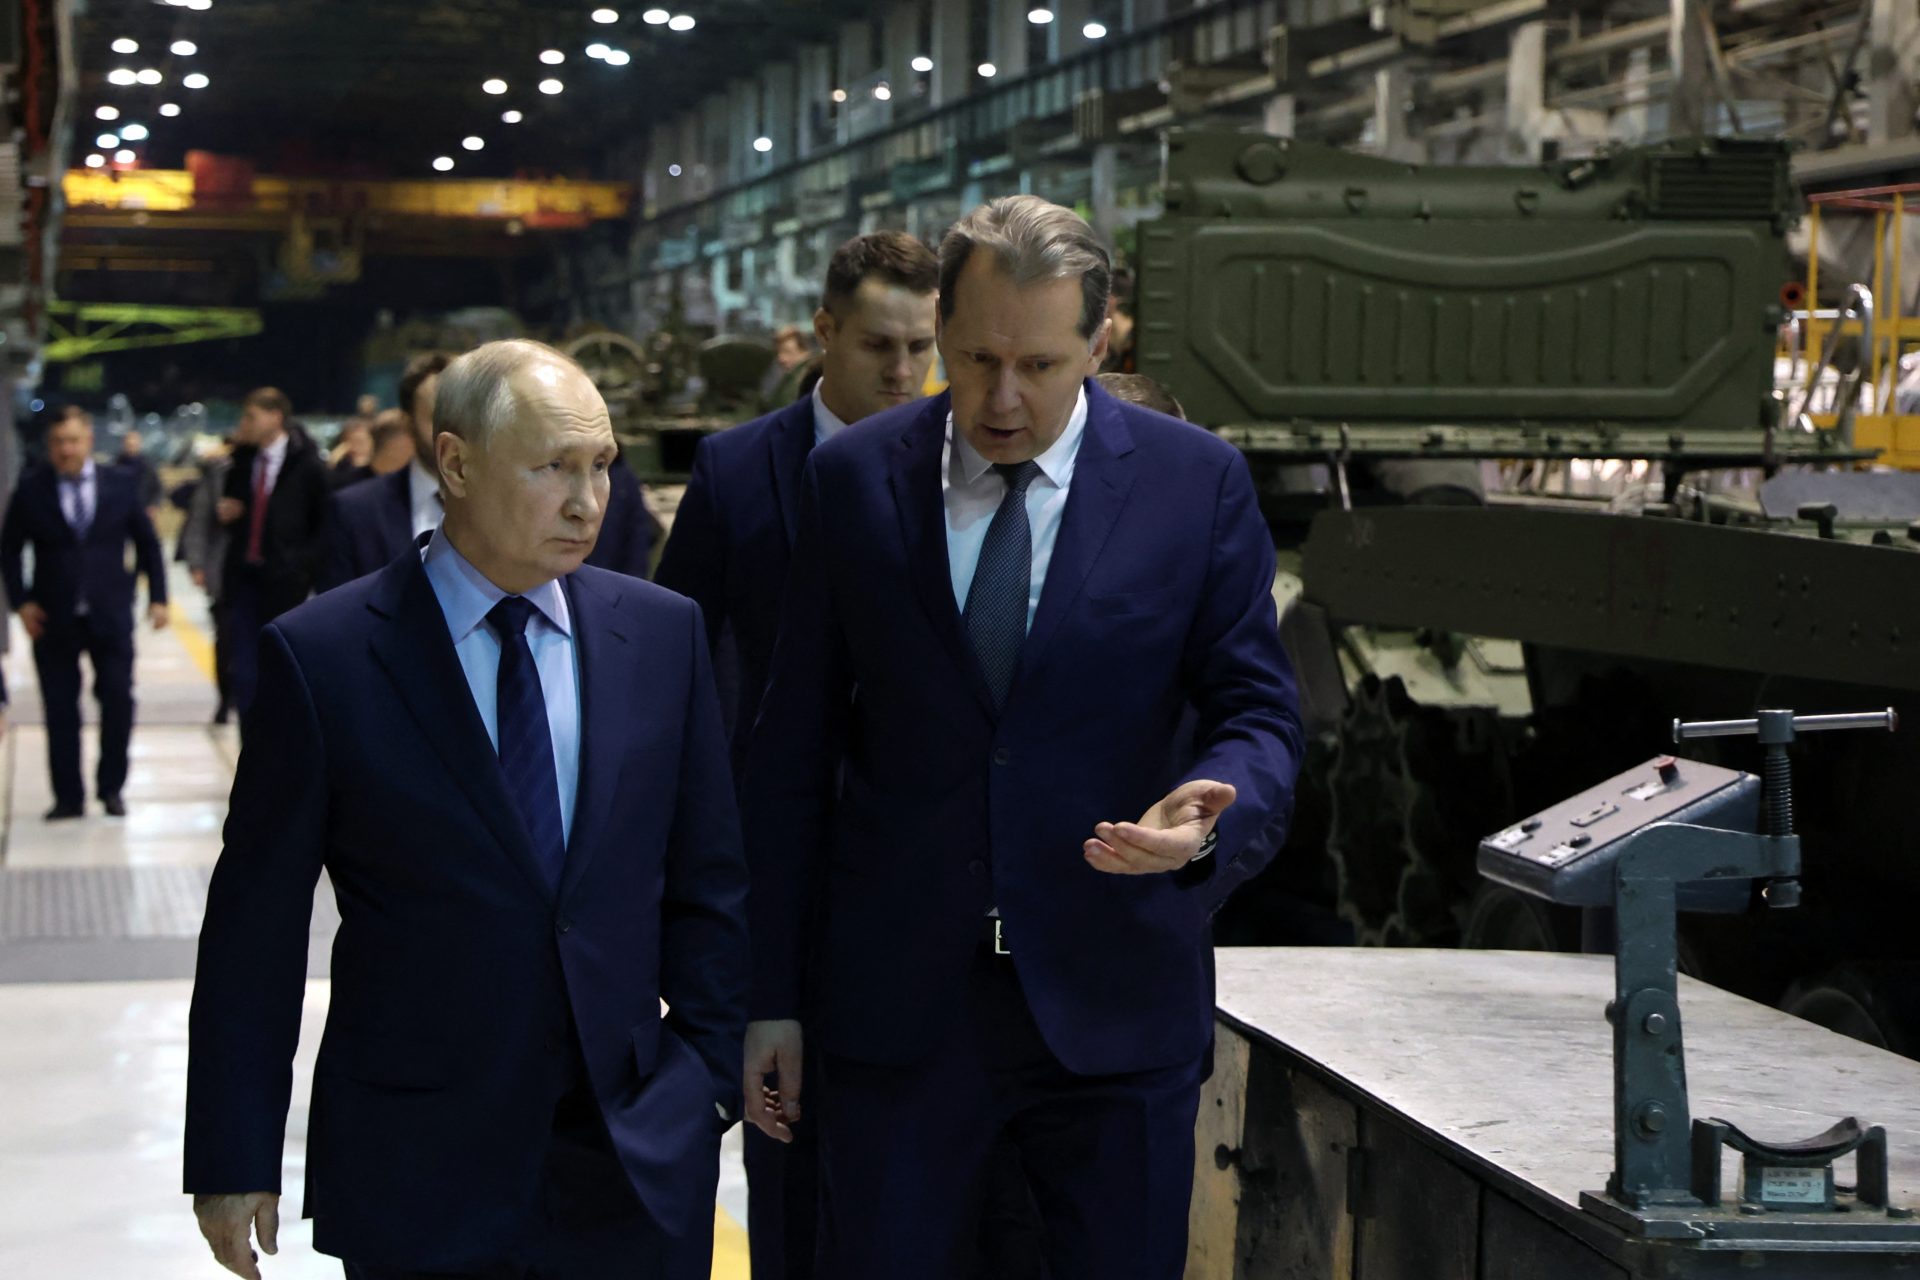 Russian defense production is starting to get really worrying